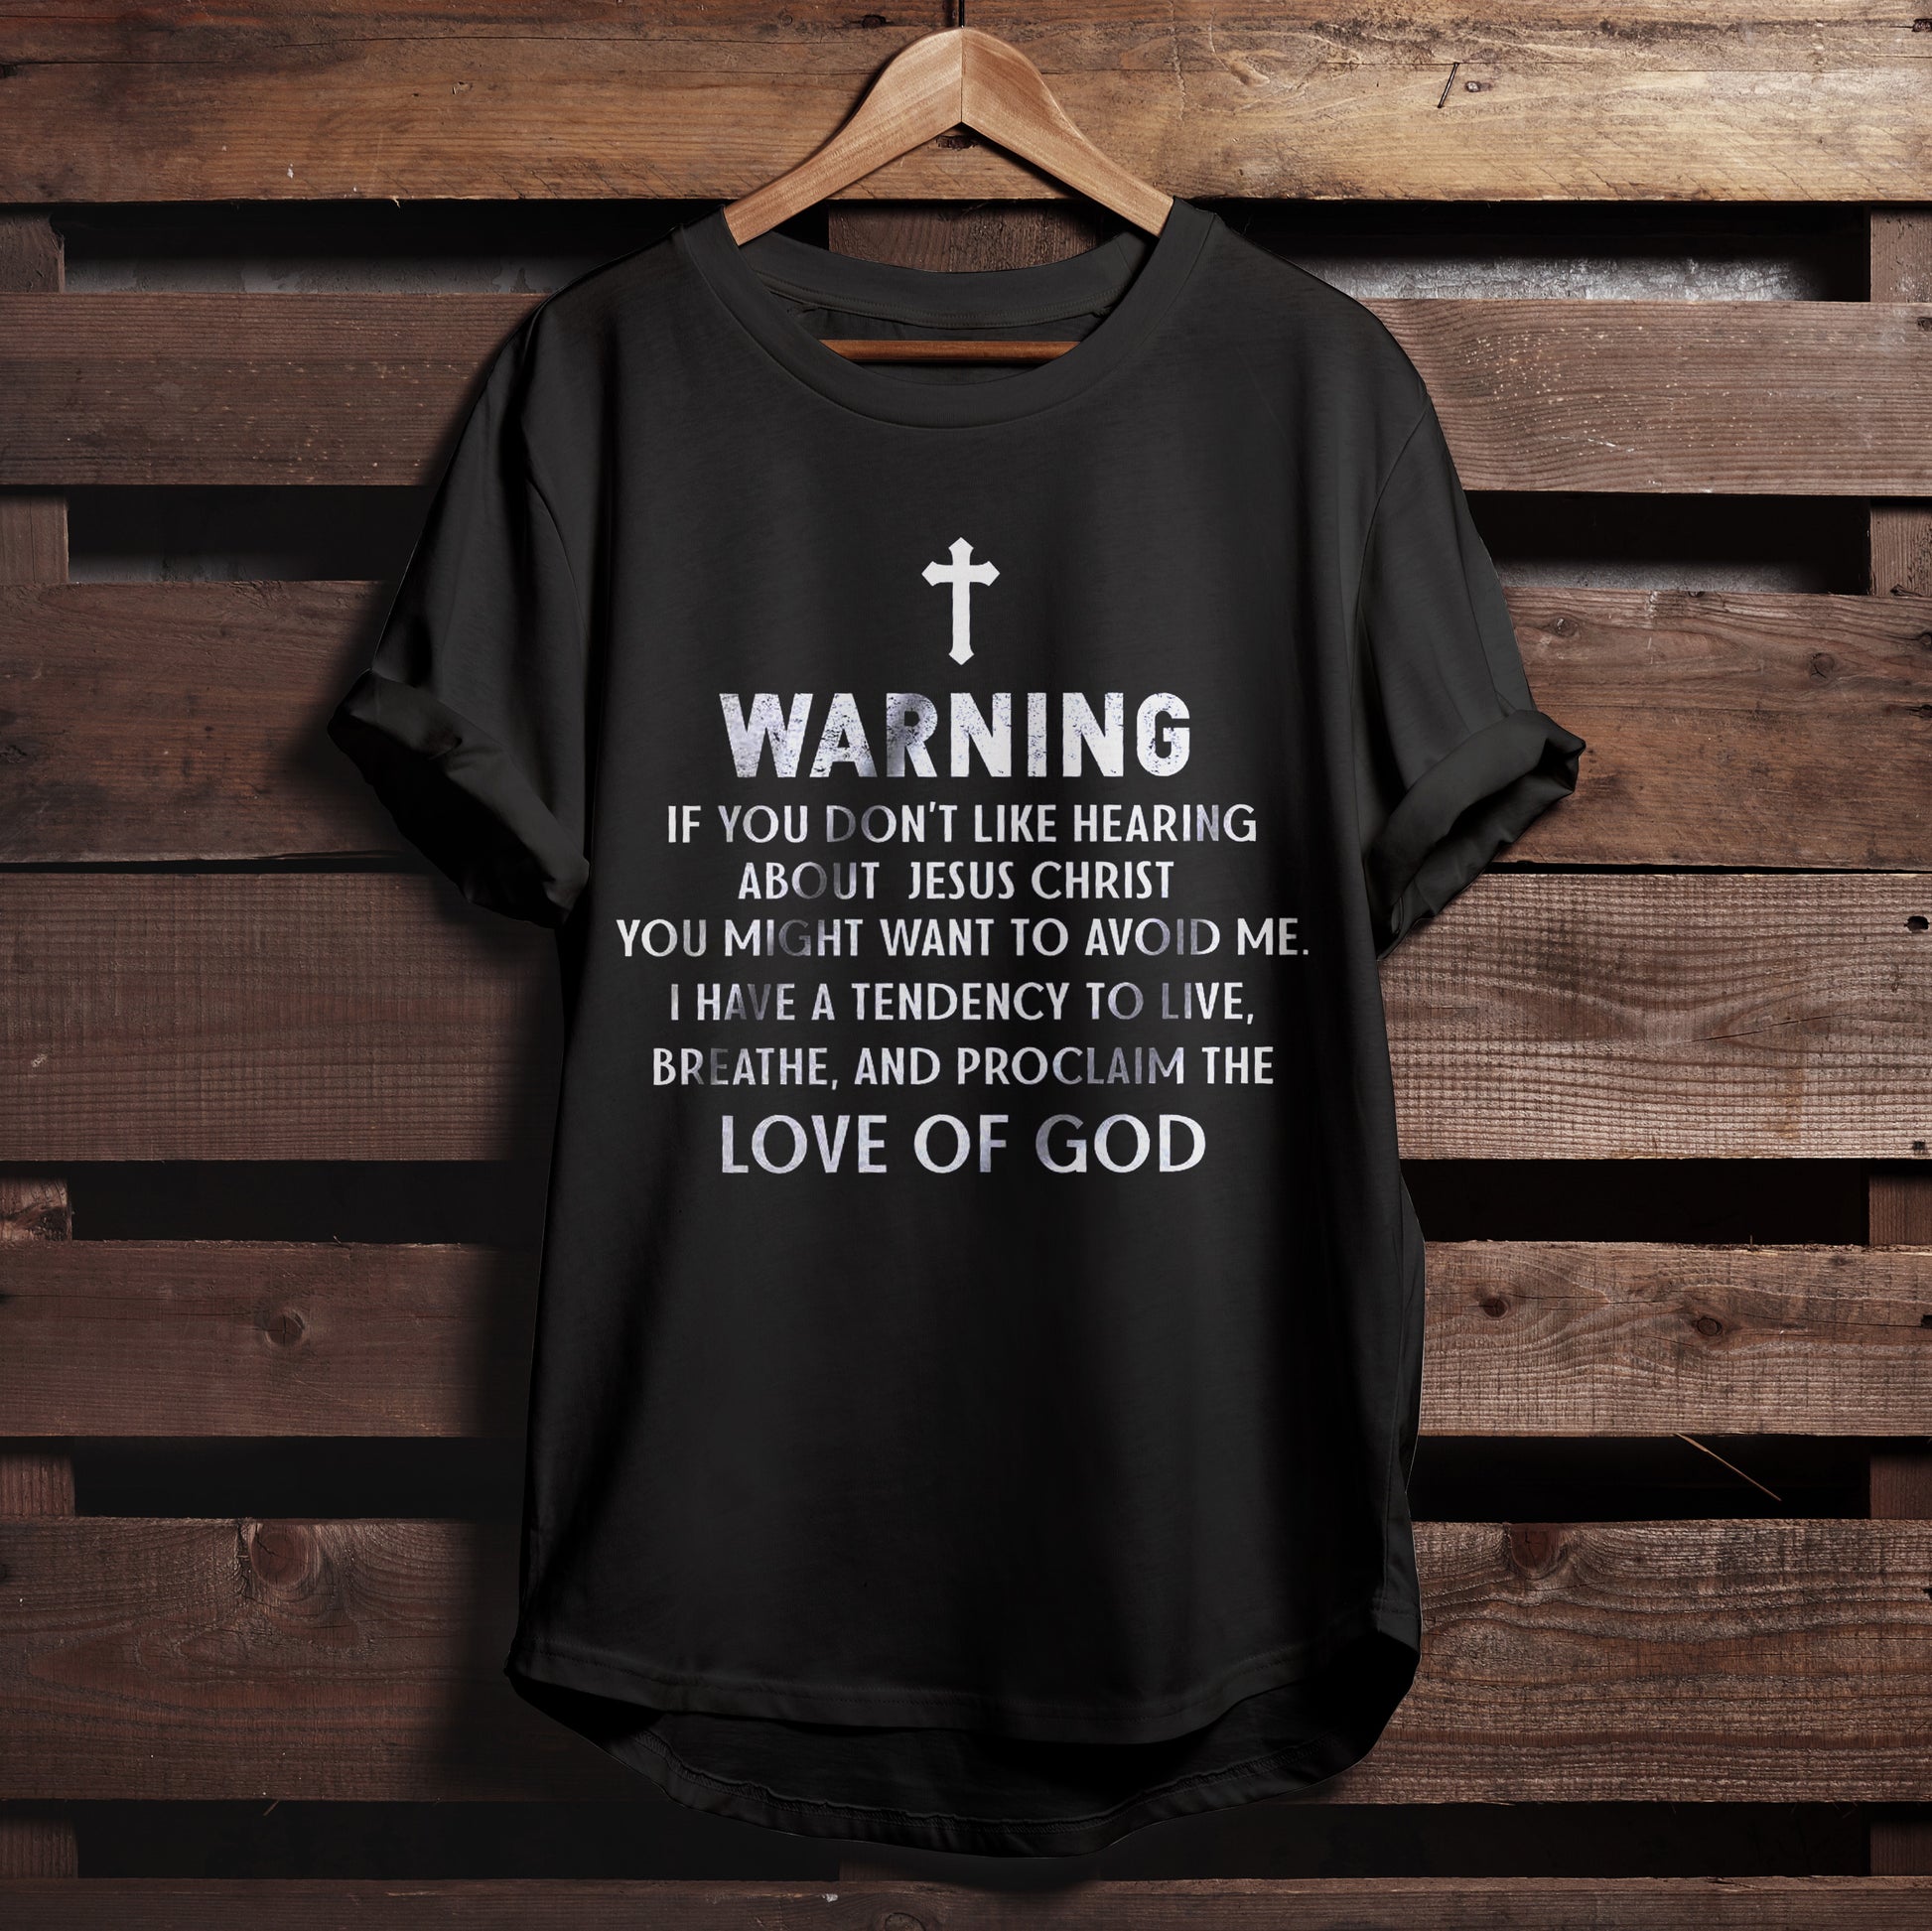 Religious Shirts - Gift For Christian - Horse -  Warning If You Don't Like Hearing About Jesus